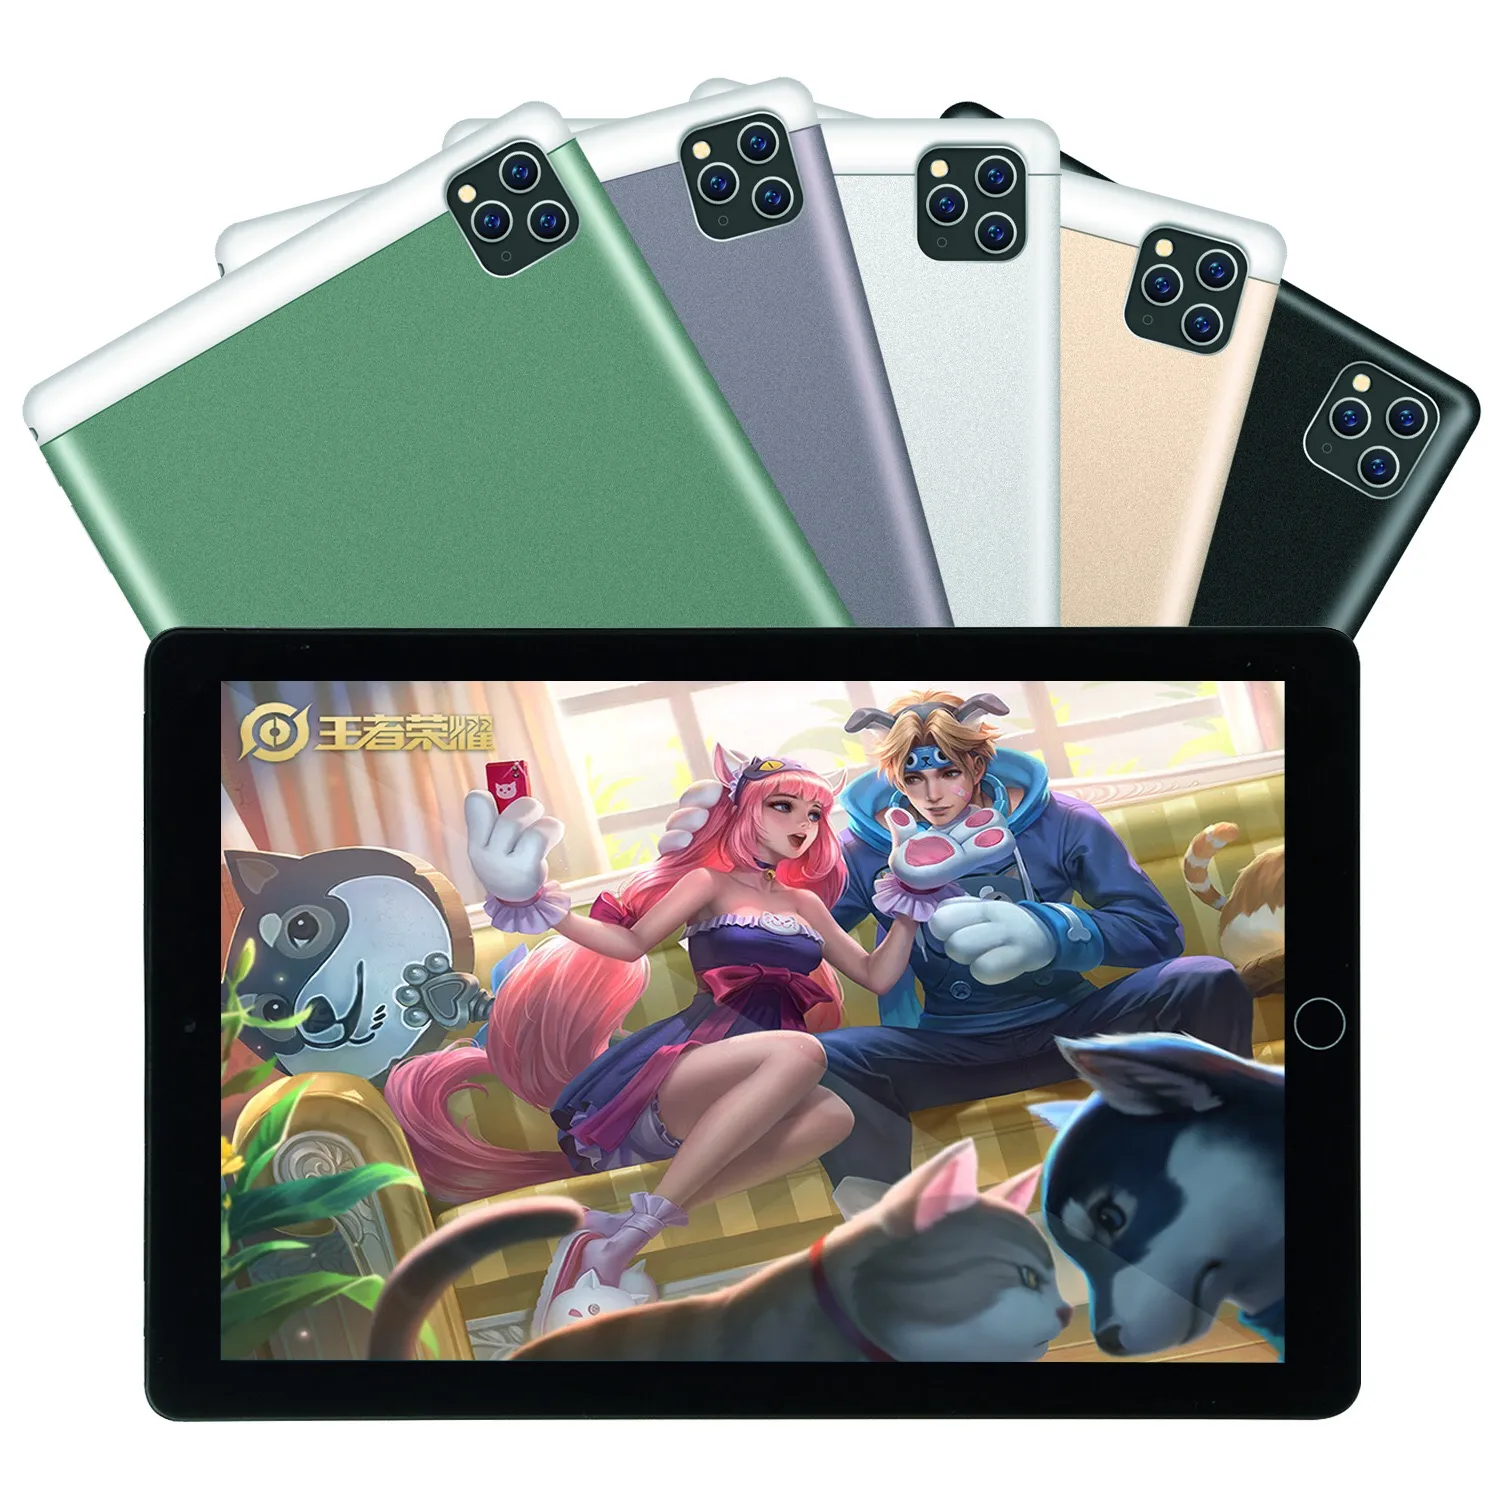 PG11 Tablet Android 10 inci 32GB ROM, tablet pc android 5G layar IPS 1920*1200 tampilan HD quad core 10 inci sim ganda